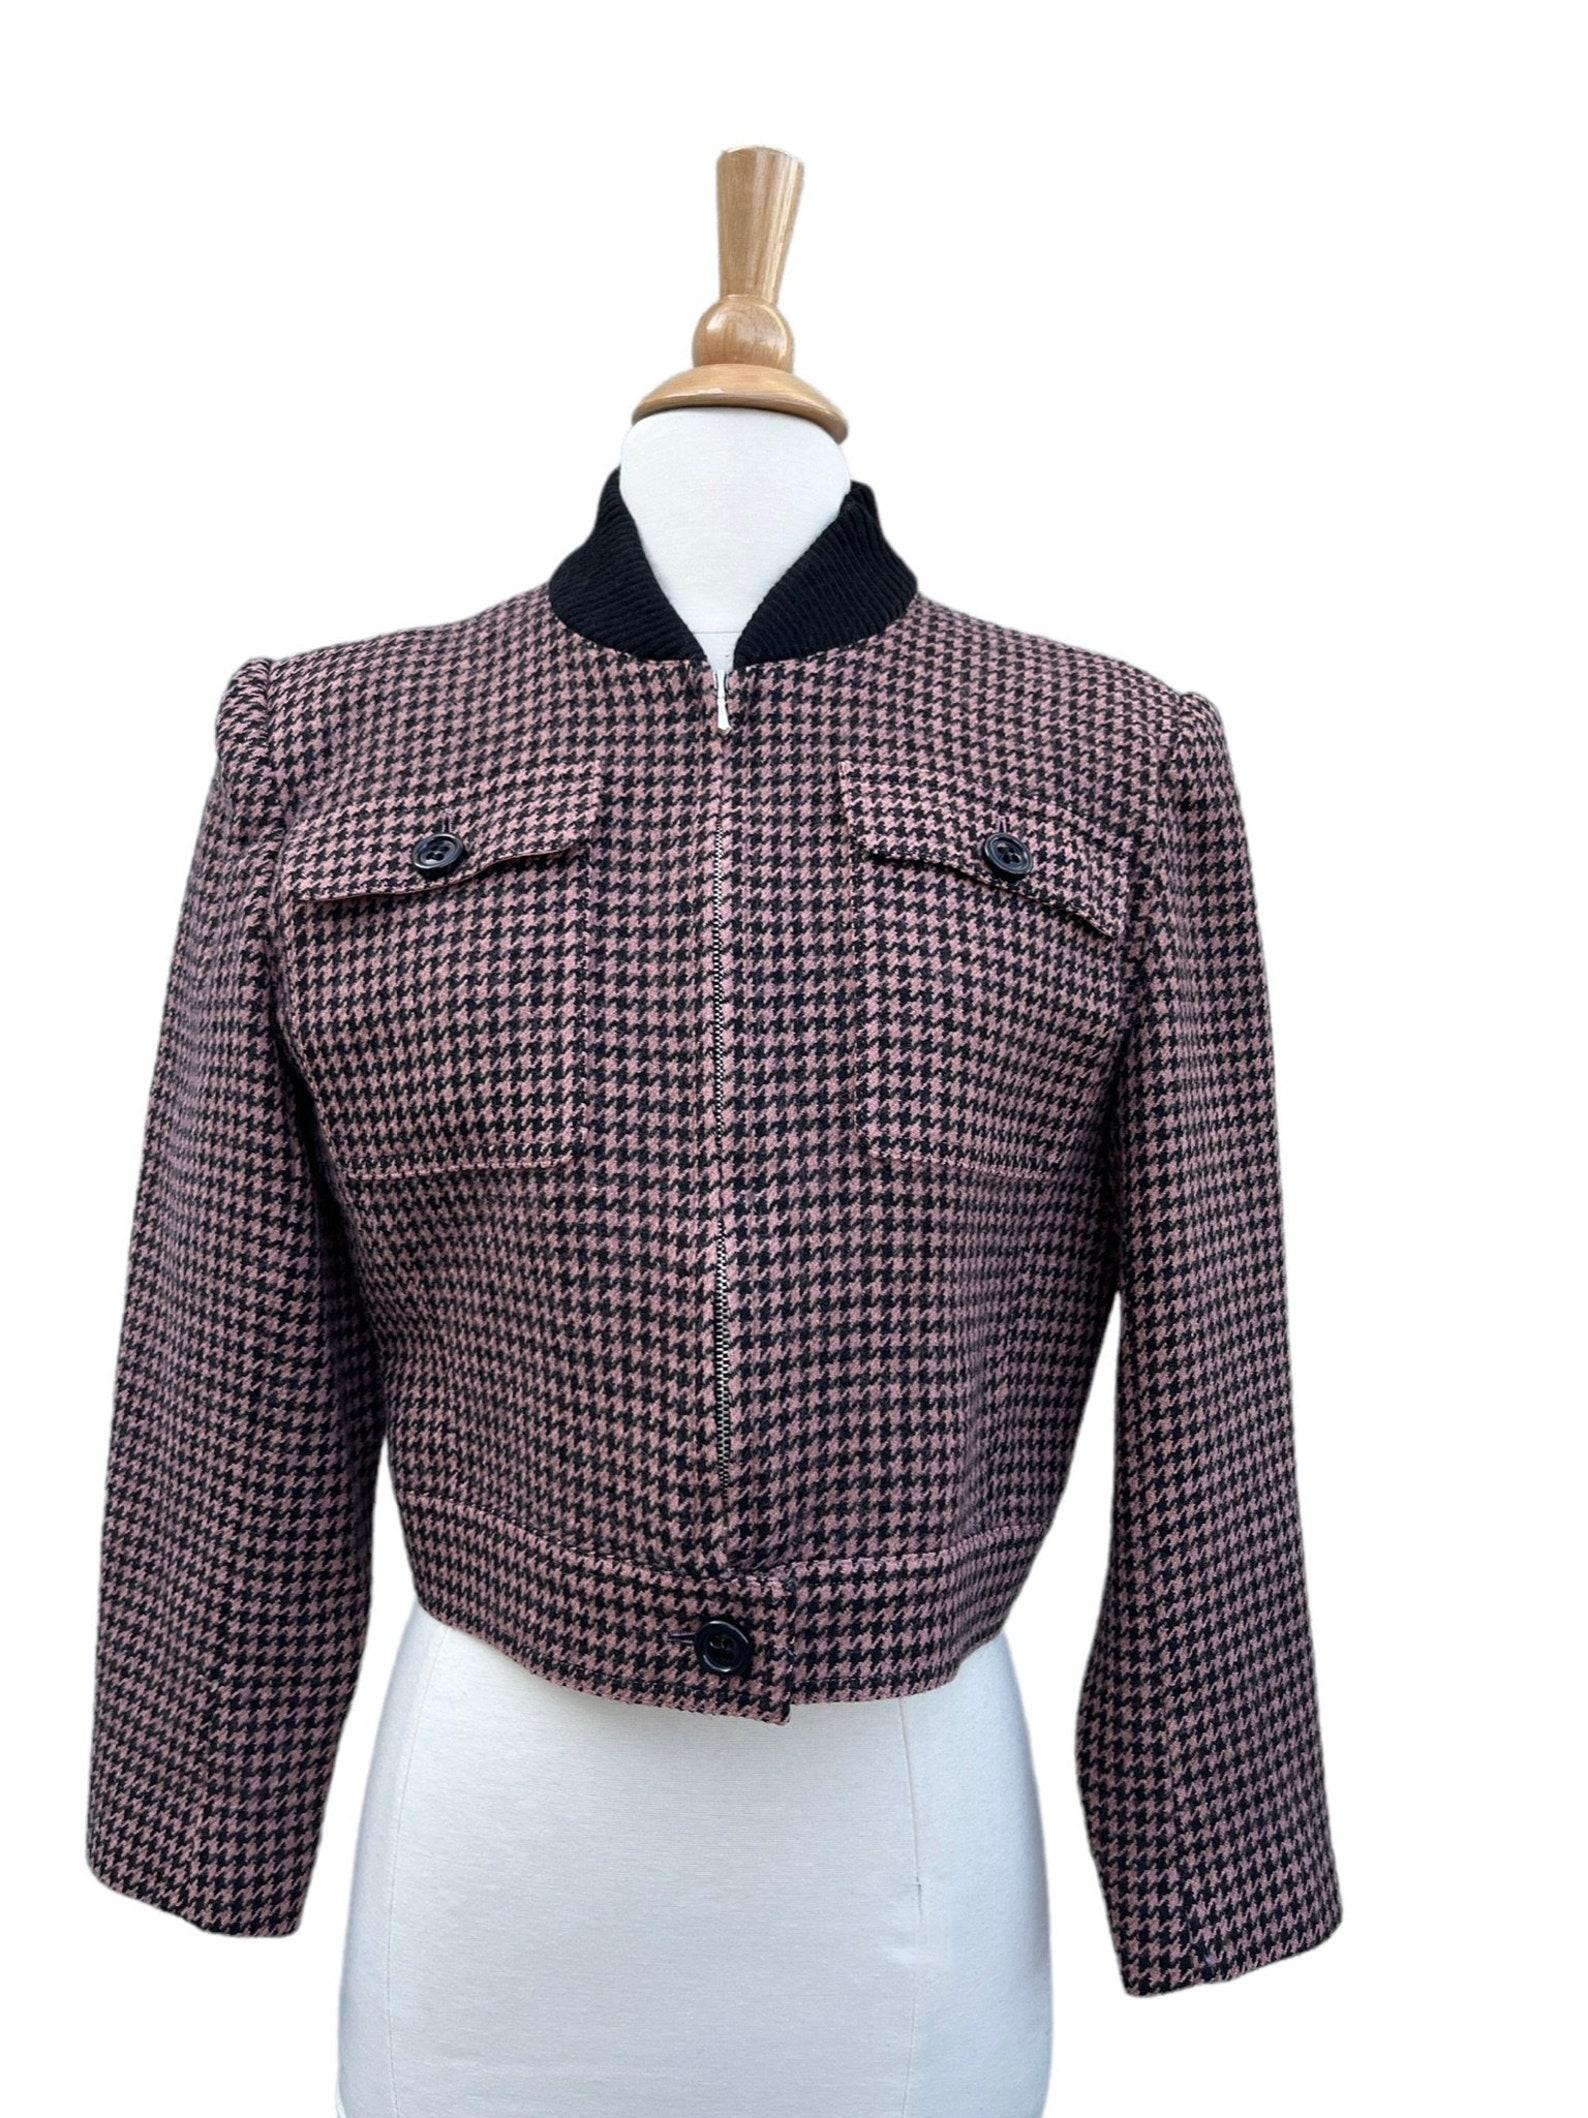 Guy Laroche Houndstooth Jacket, Circa 1980s For Sale 2